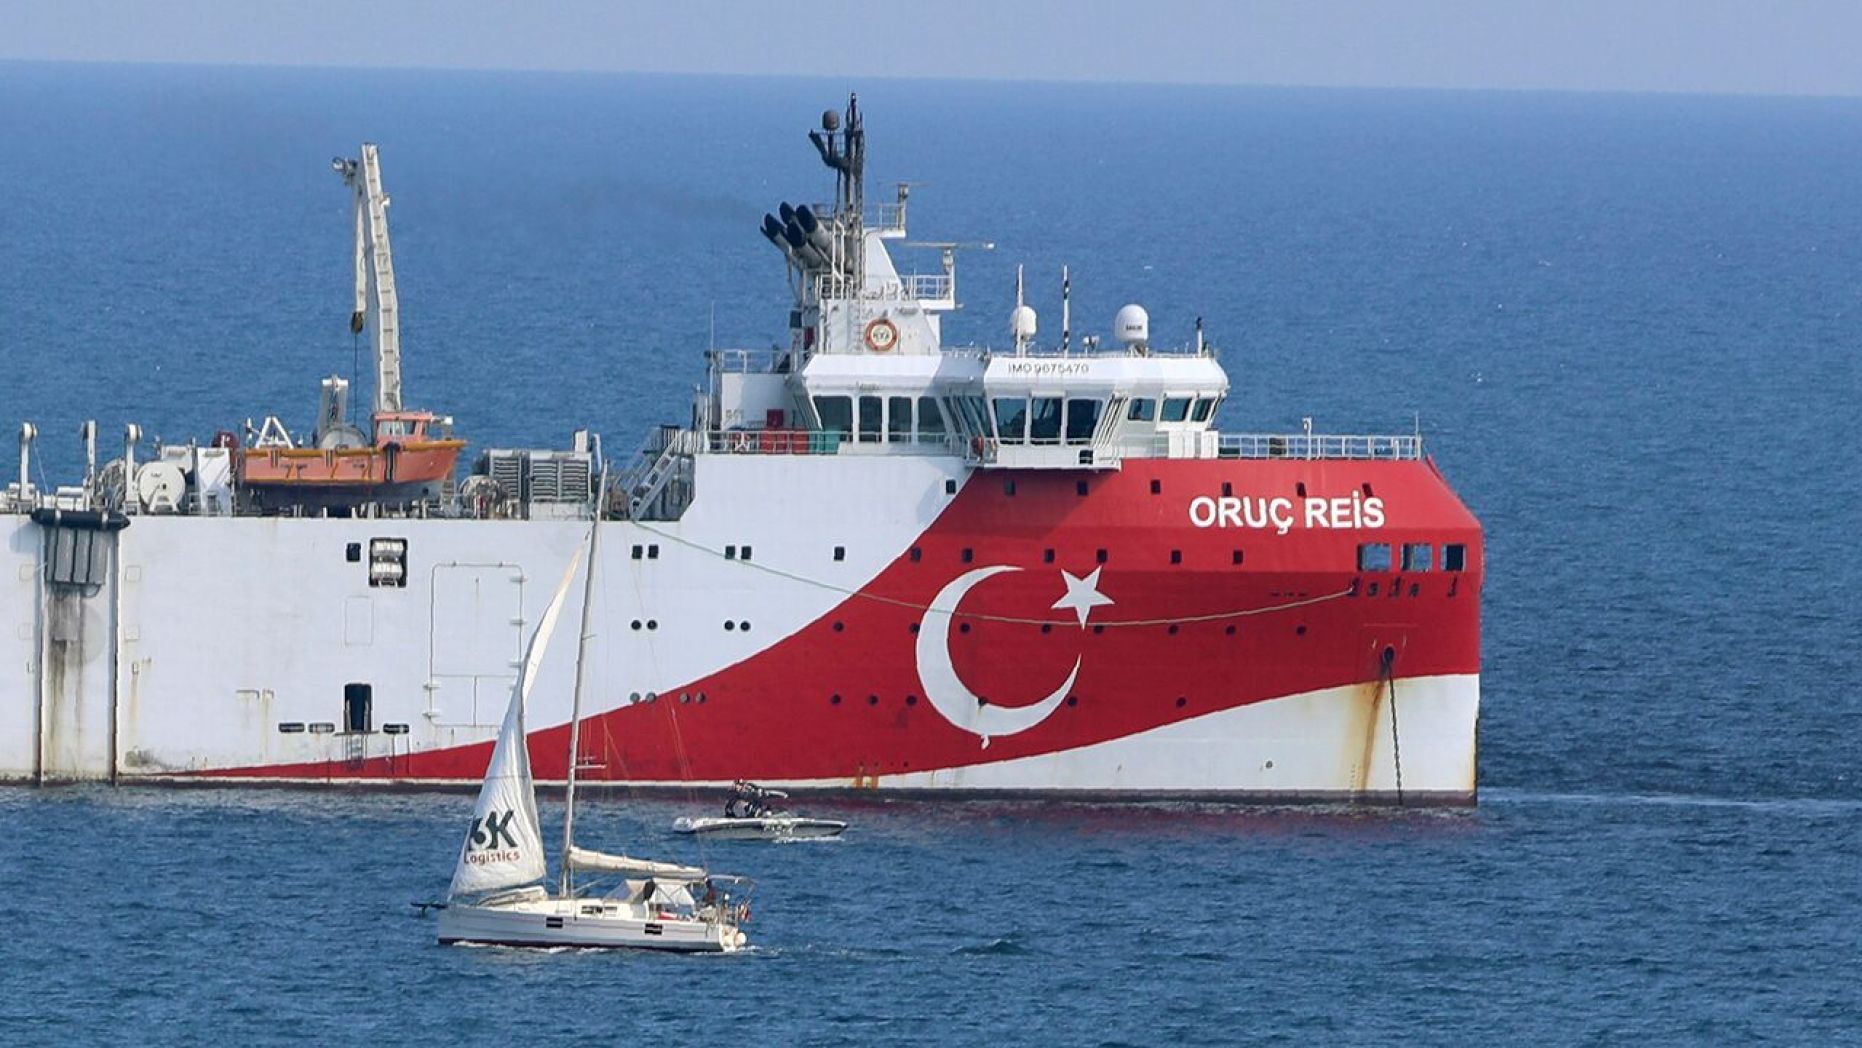 Turkey’s confrontational foreign policy challenges Greece, European Union amid rising maritime tensions